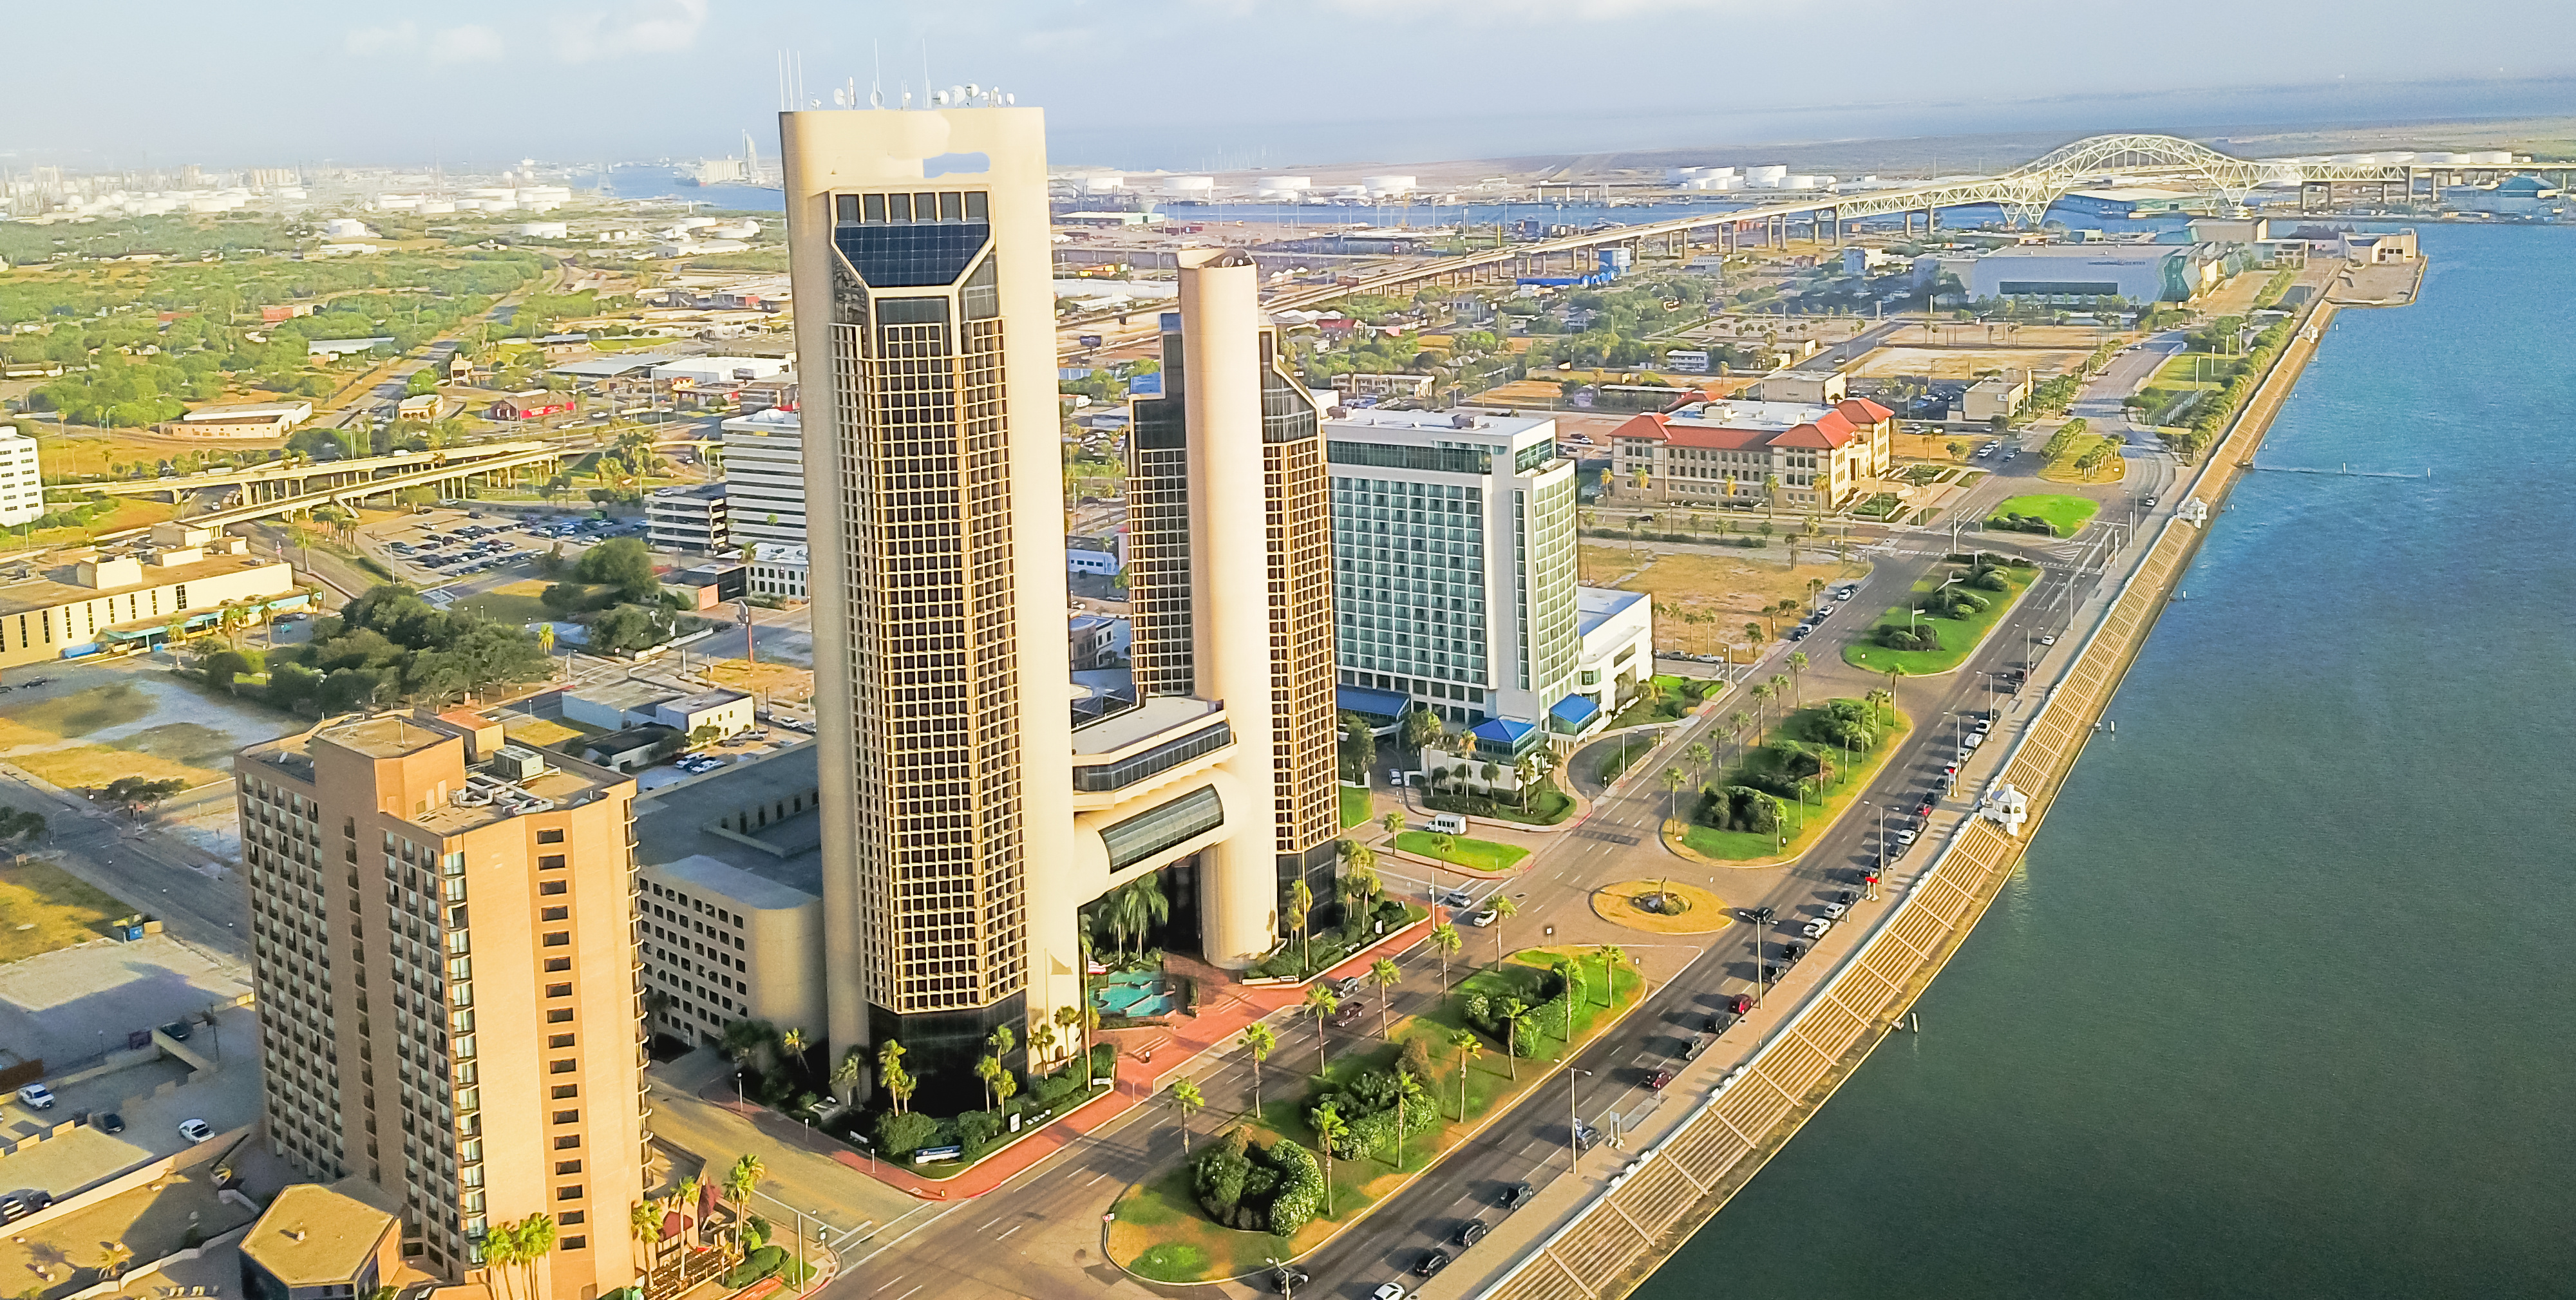 Aerial view of Corpus Christi’s distinctive skyline with the Harbor Bridge in the background.